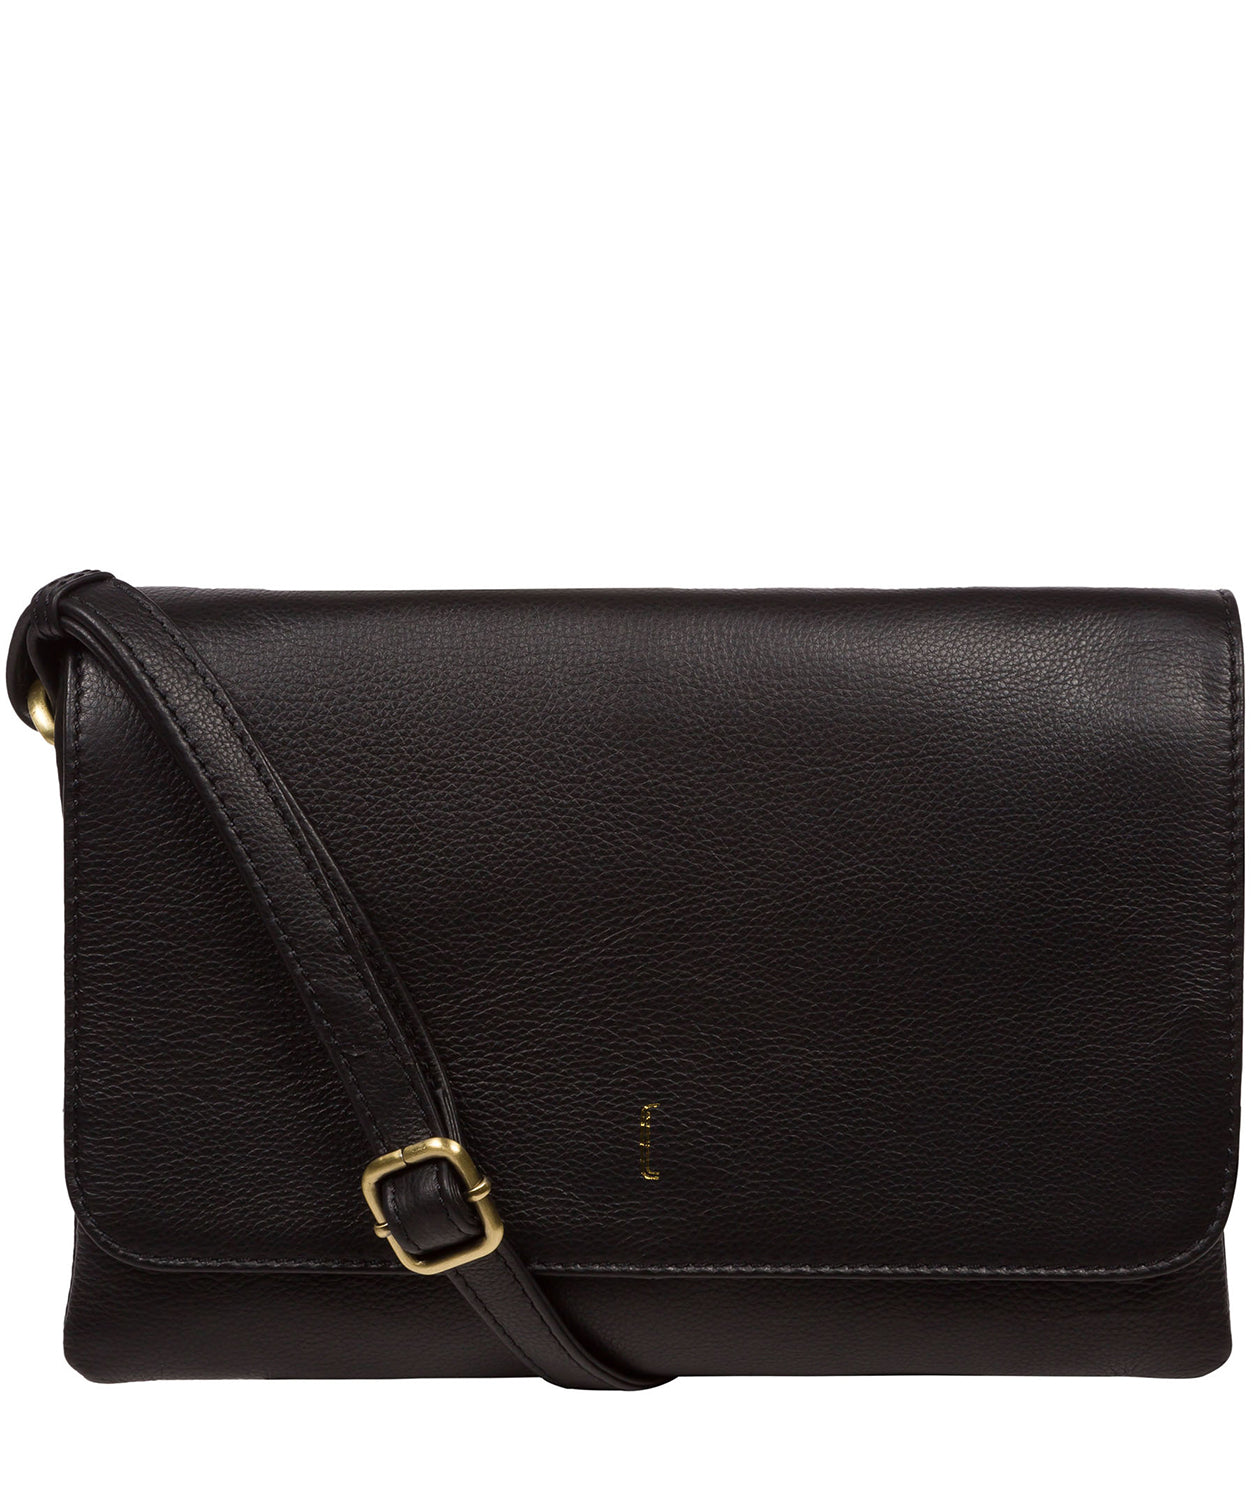 'Izzy' Black Leather Cross Body Bag Pure Luxuries London